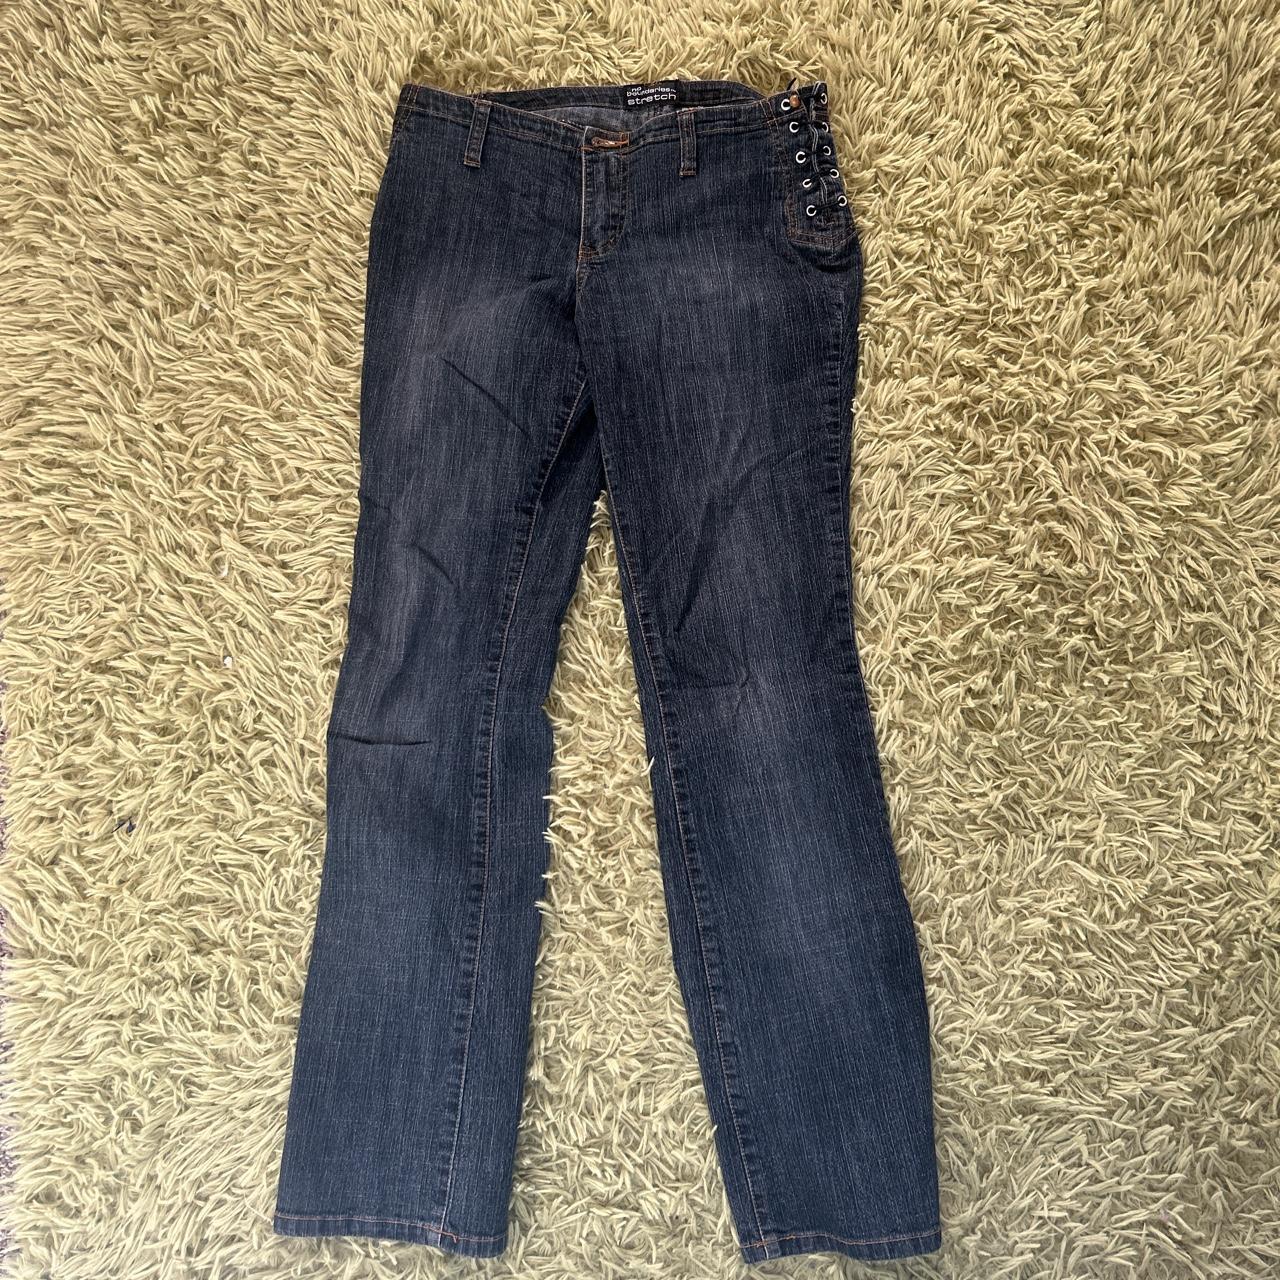 No Boundaries Size Small Flared Jeggings! Never been - Depop